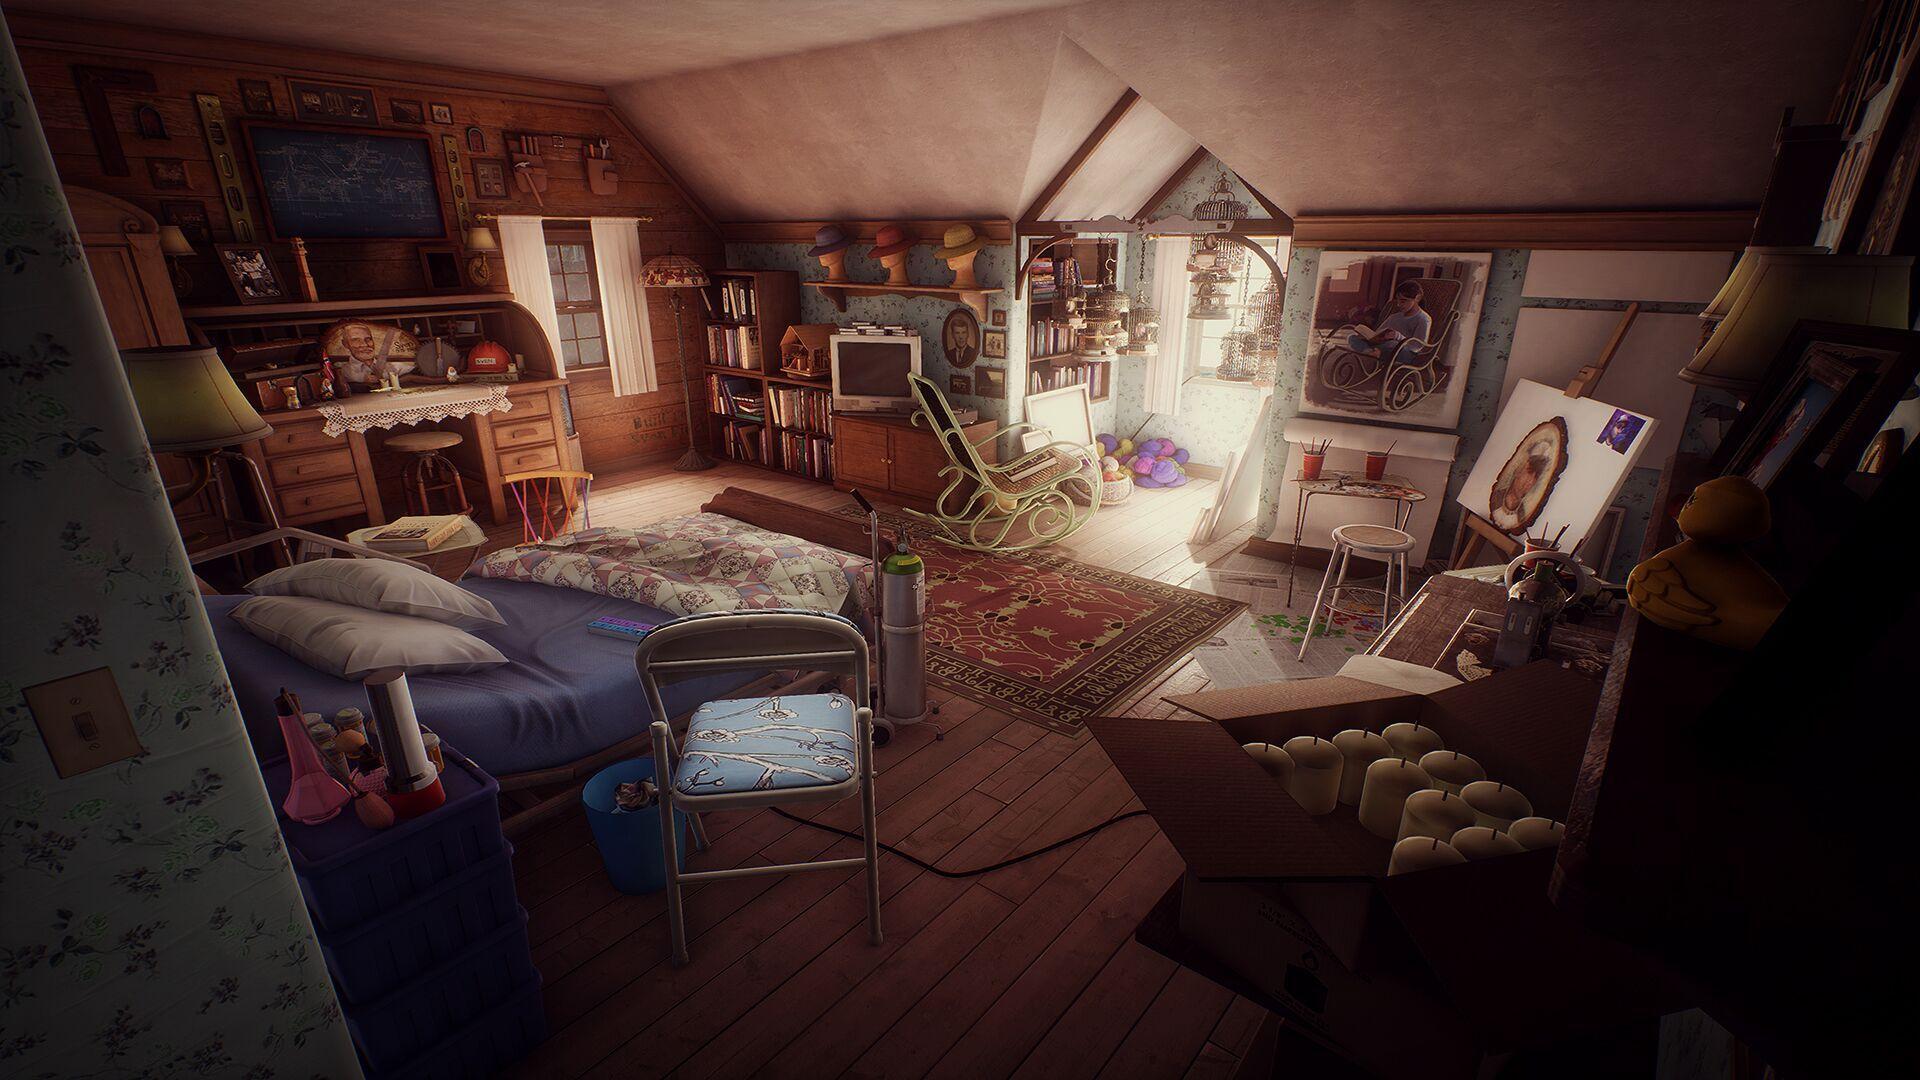 What Remains of Edith Finch is currently free on Epic Games Store